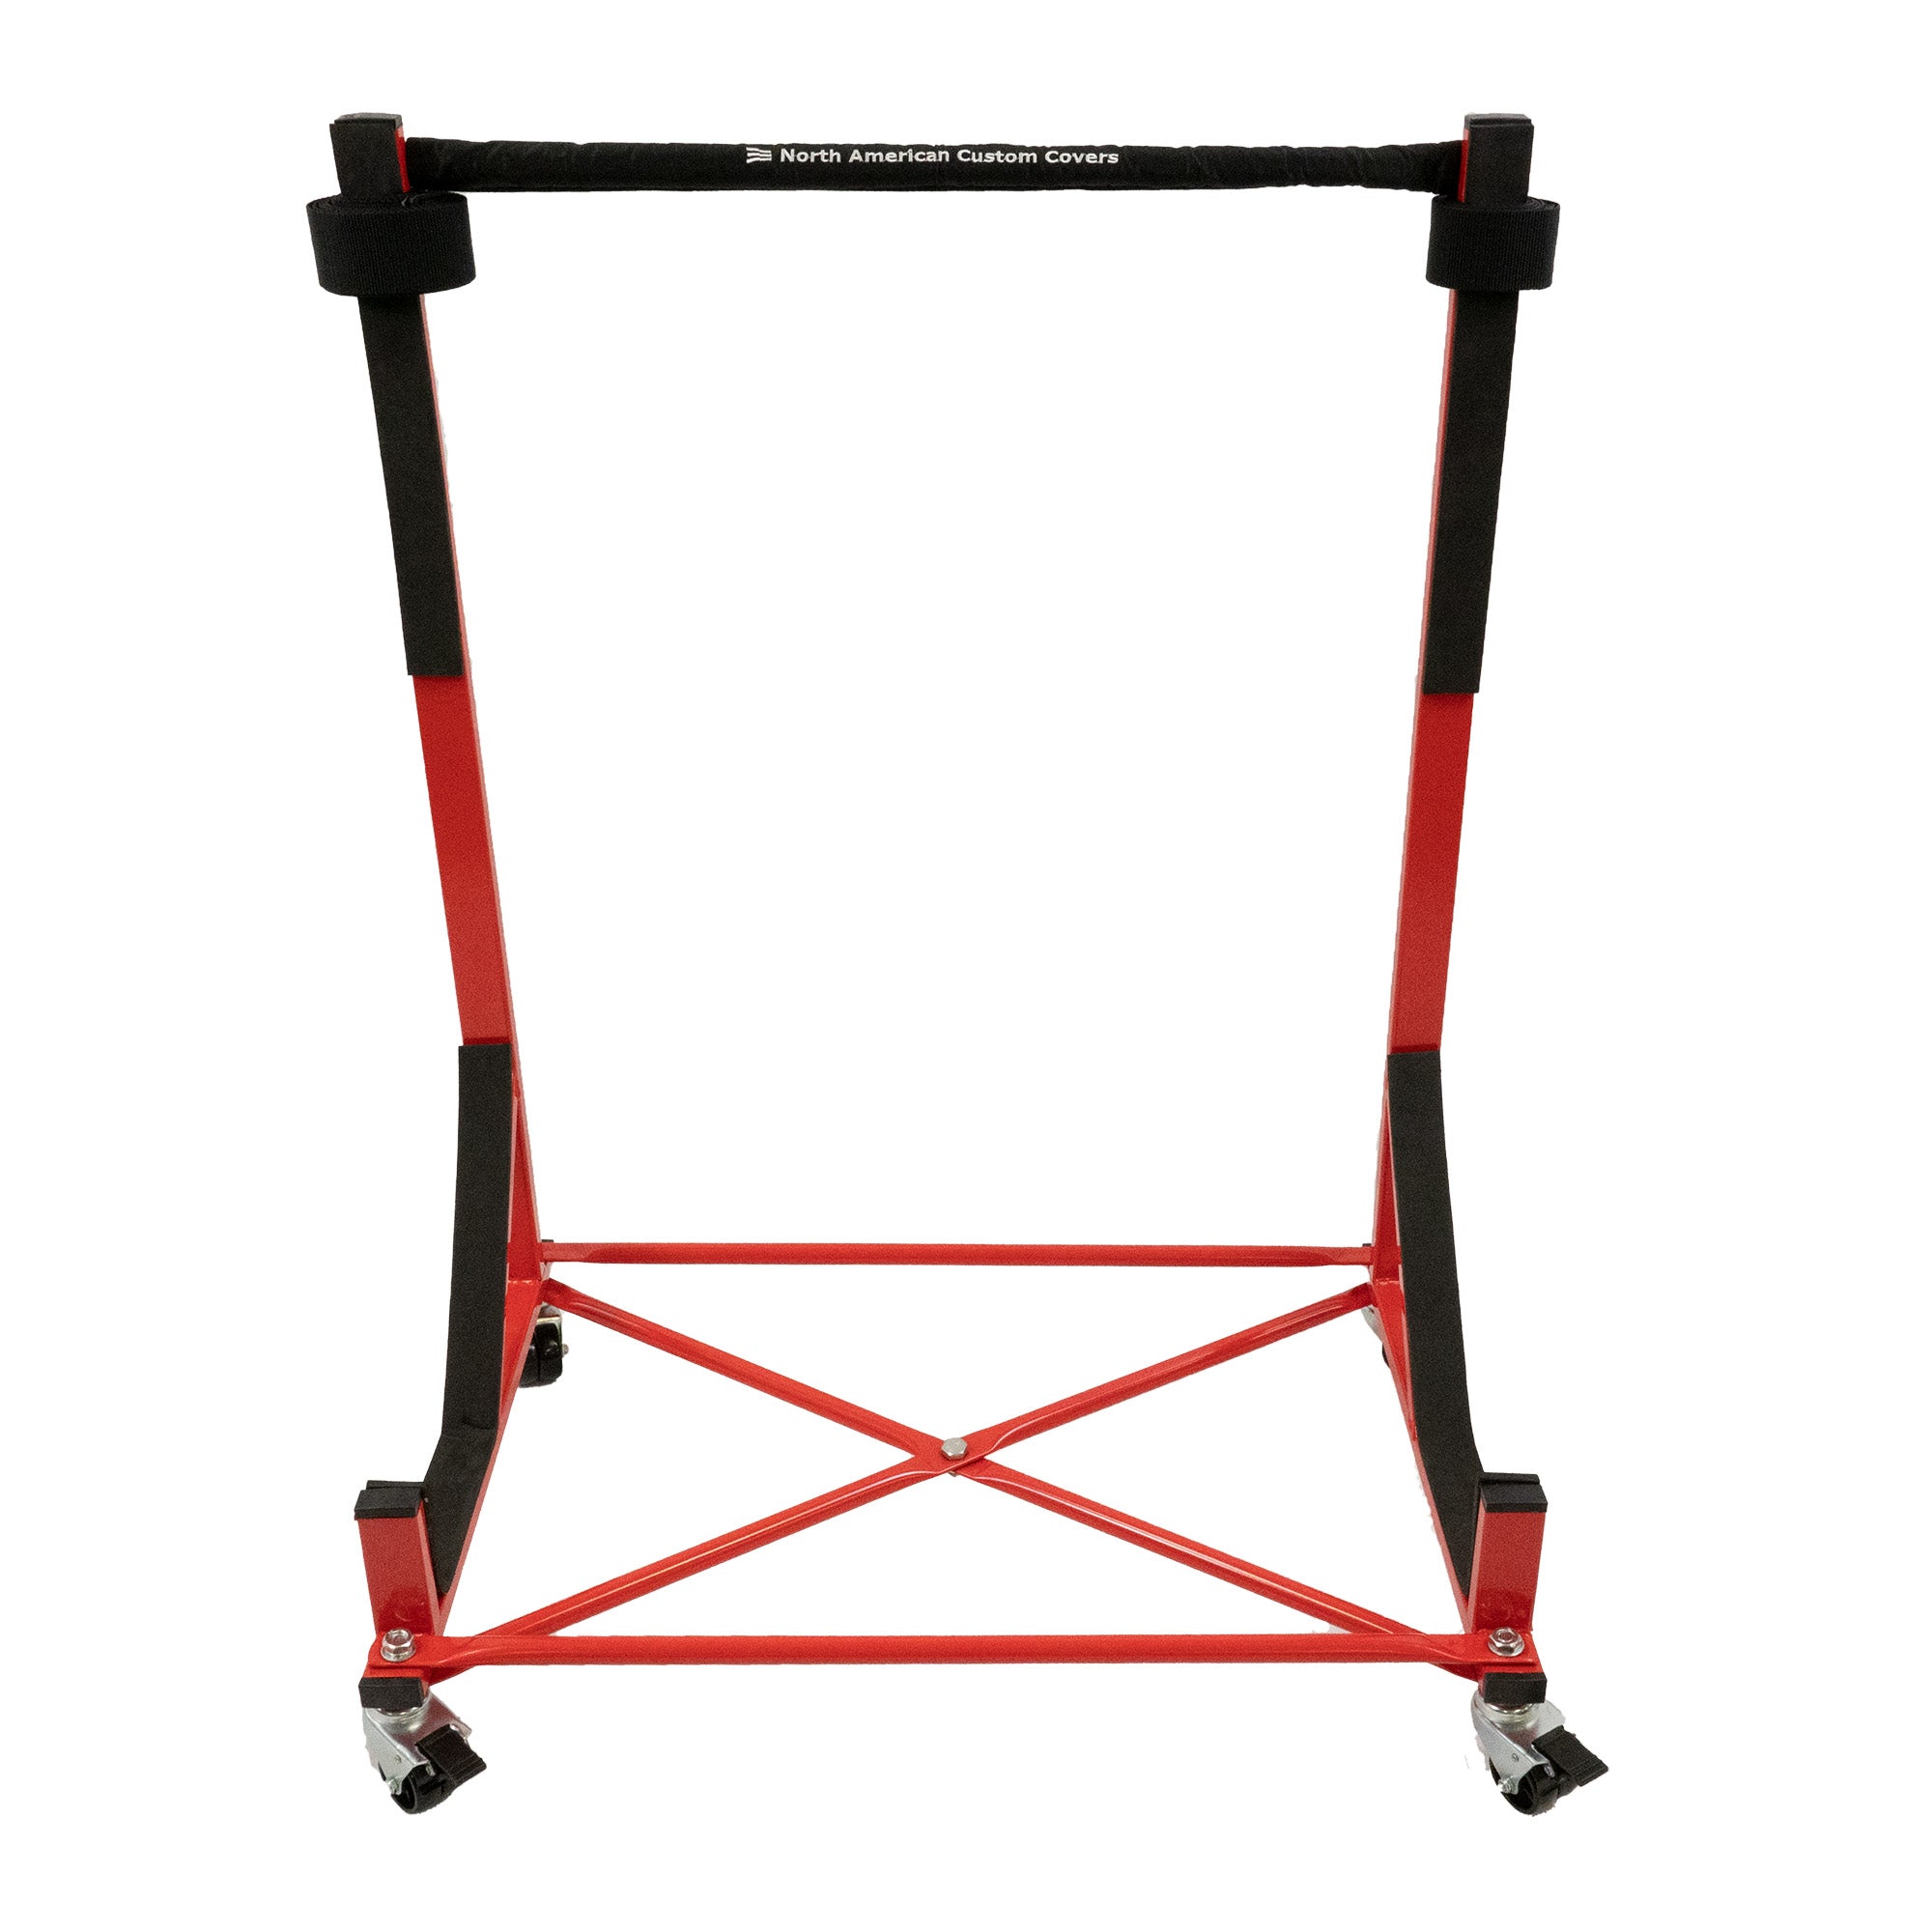 Ford Thunderbird Heavy-duty Hardtop Stand Trolley Cart Rack (Red) with Securing Harness, Top Bar Cover & Hard Top Dust Cover (050R)